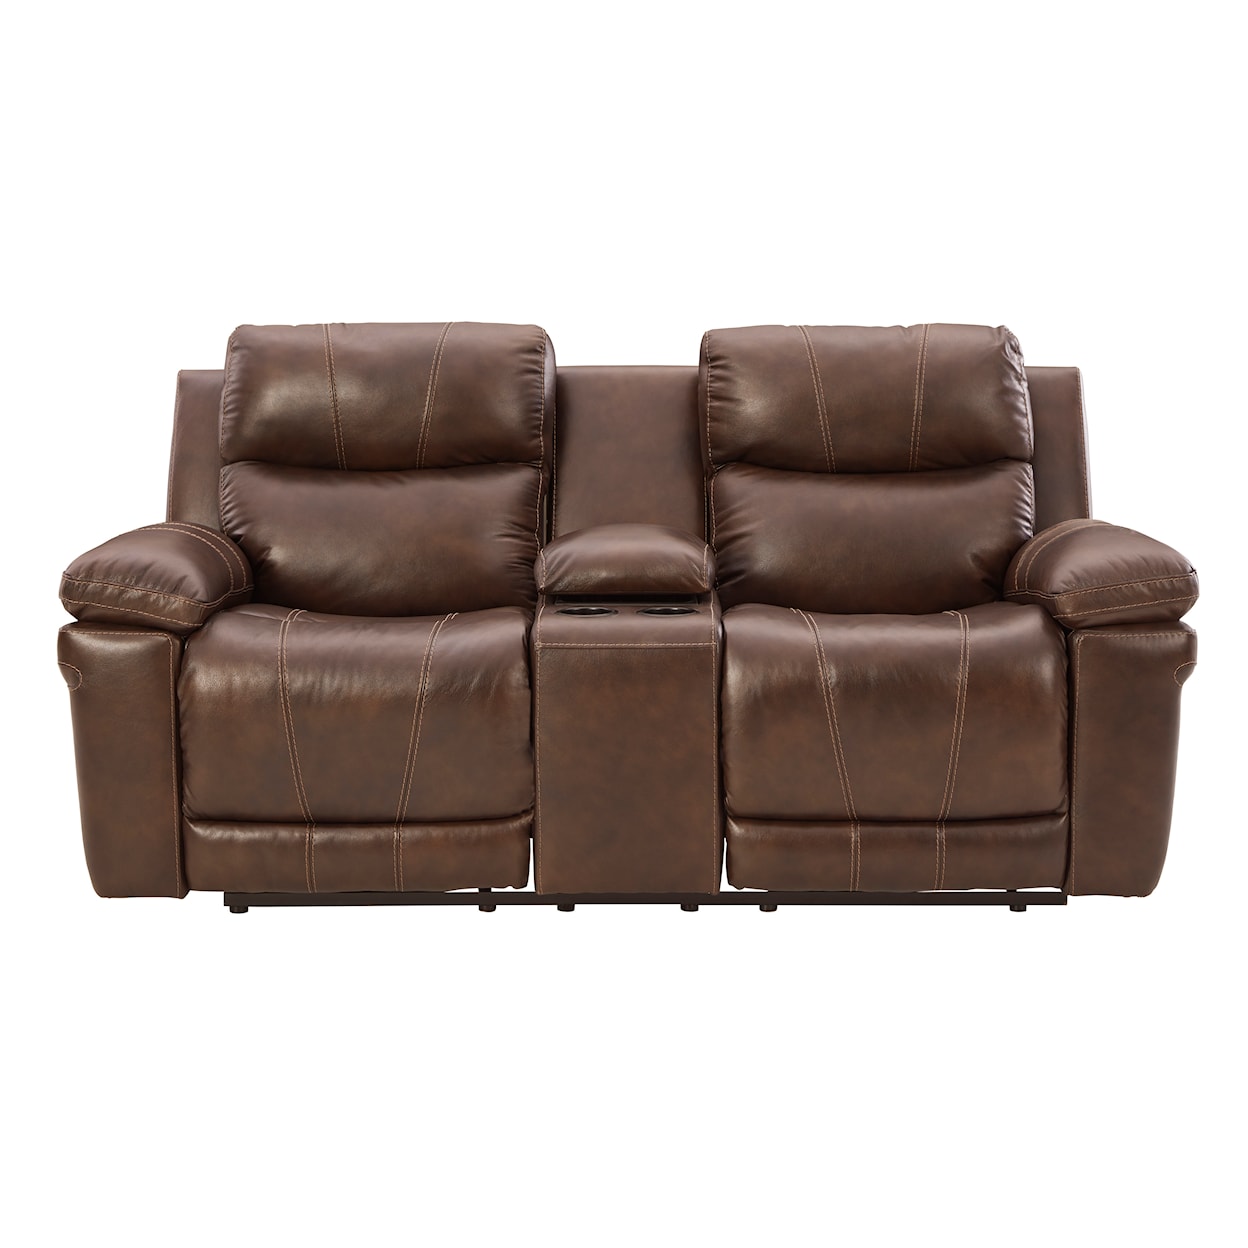 Signature Design by Ashley Furniture Edmar Power Reclining Loveseat with Console